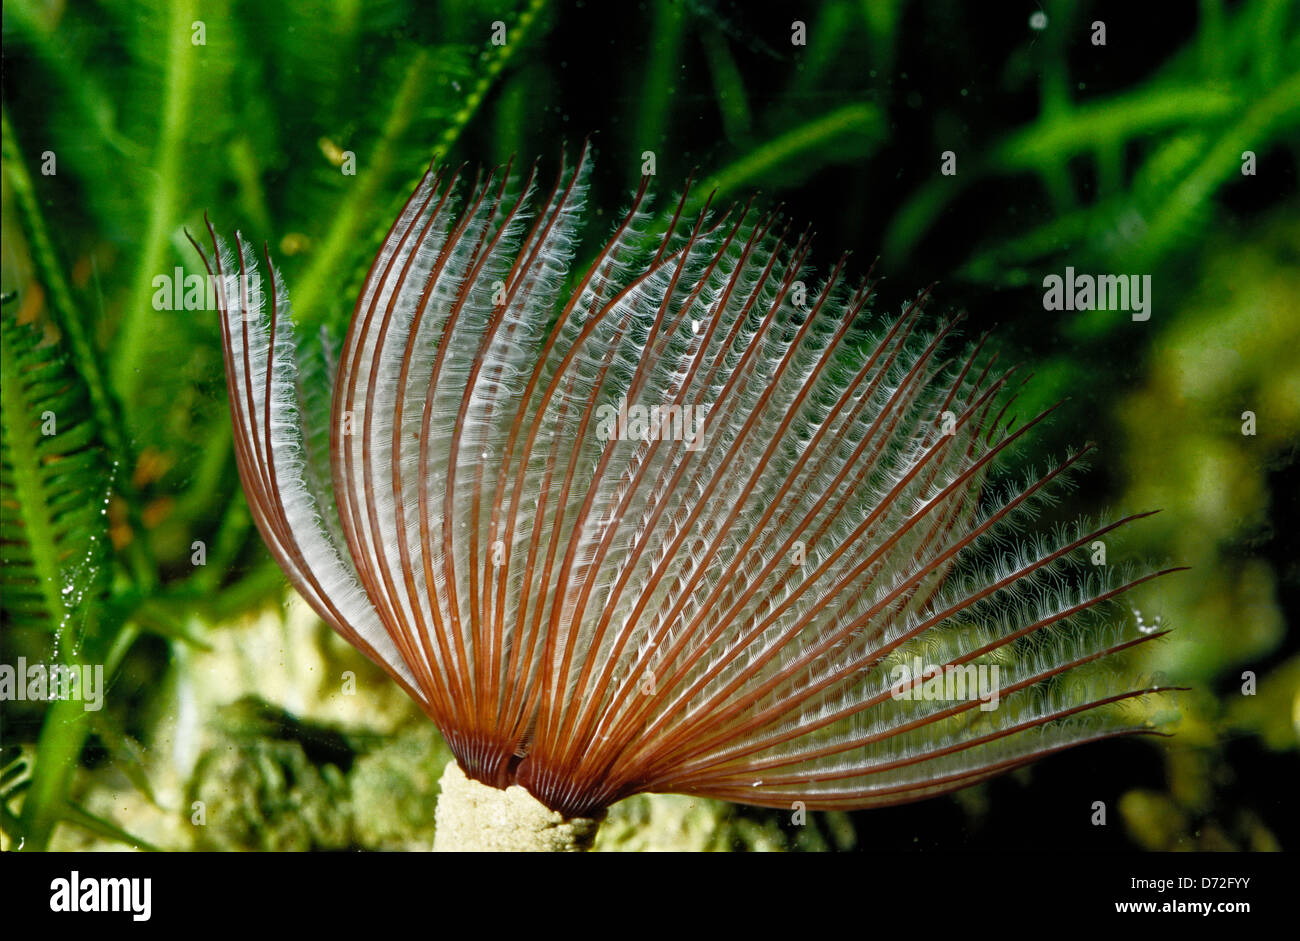 Feather Duster Worm/Tube Worm. Sabellastarte sp., Anellida, Indo-pacific ocean Stock Photo